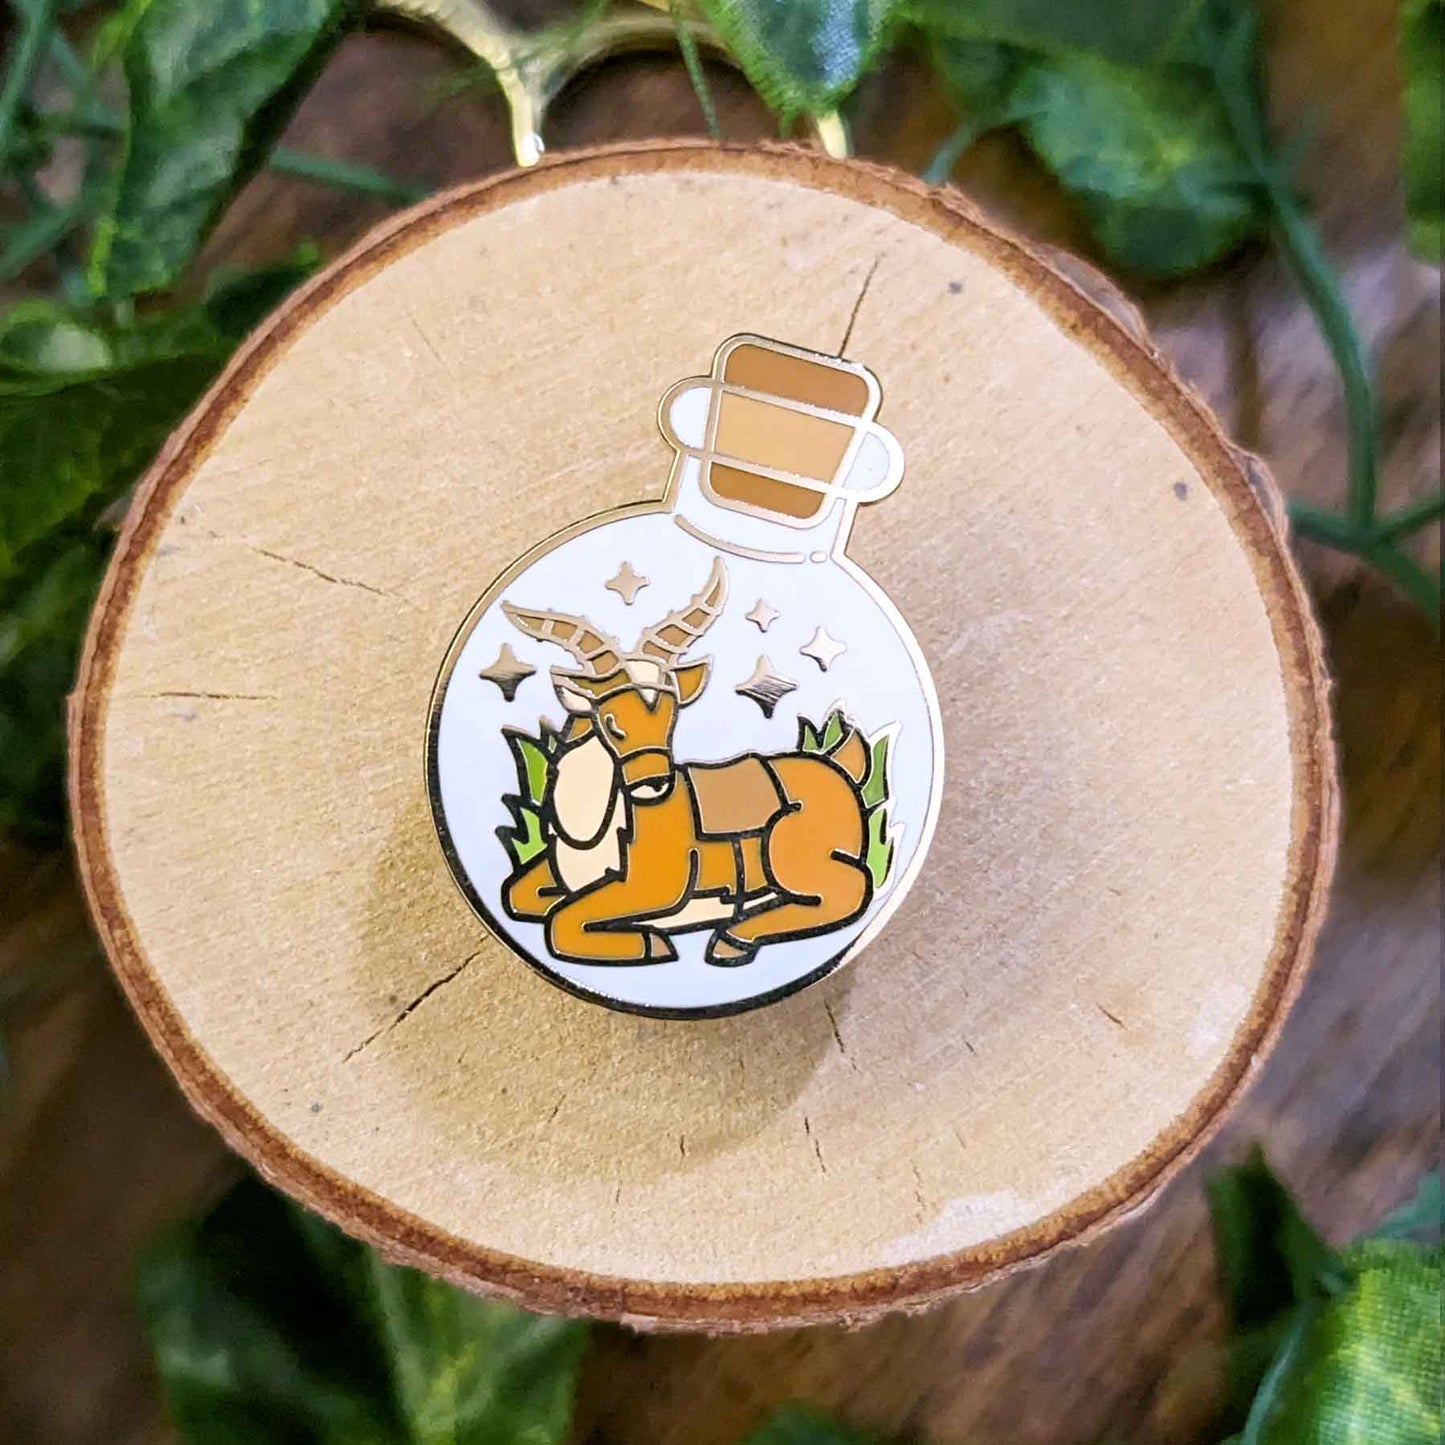 Resting brown antelope deer with saddle in a potion bottle enamel pin designed by EXP Gained